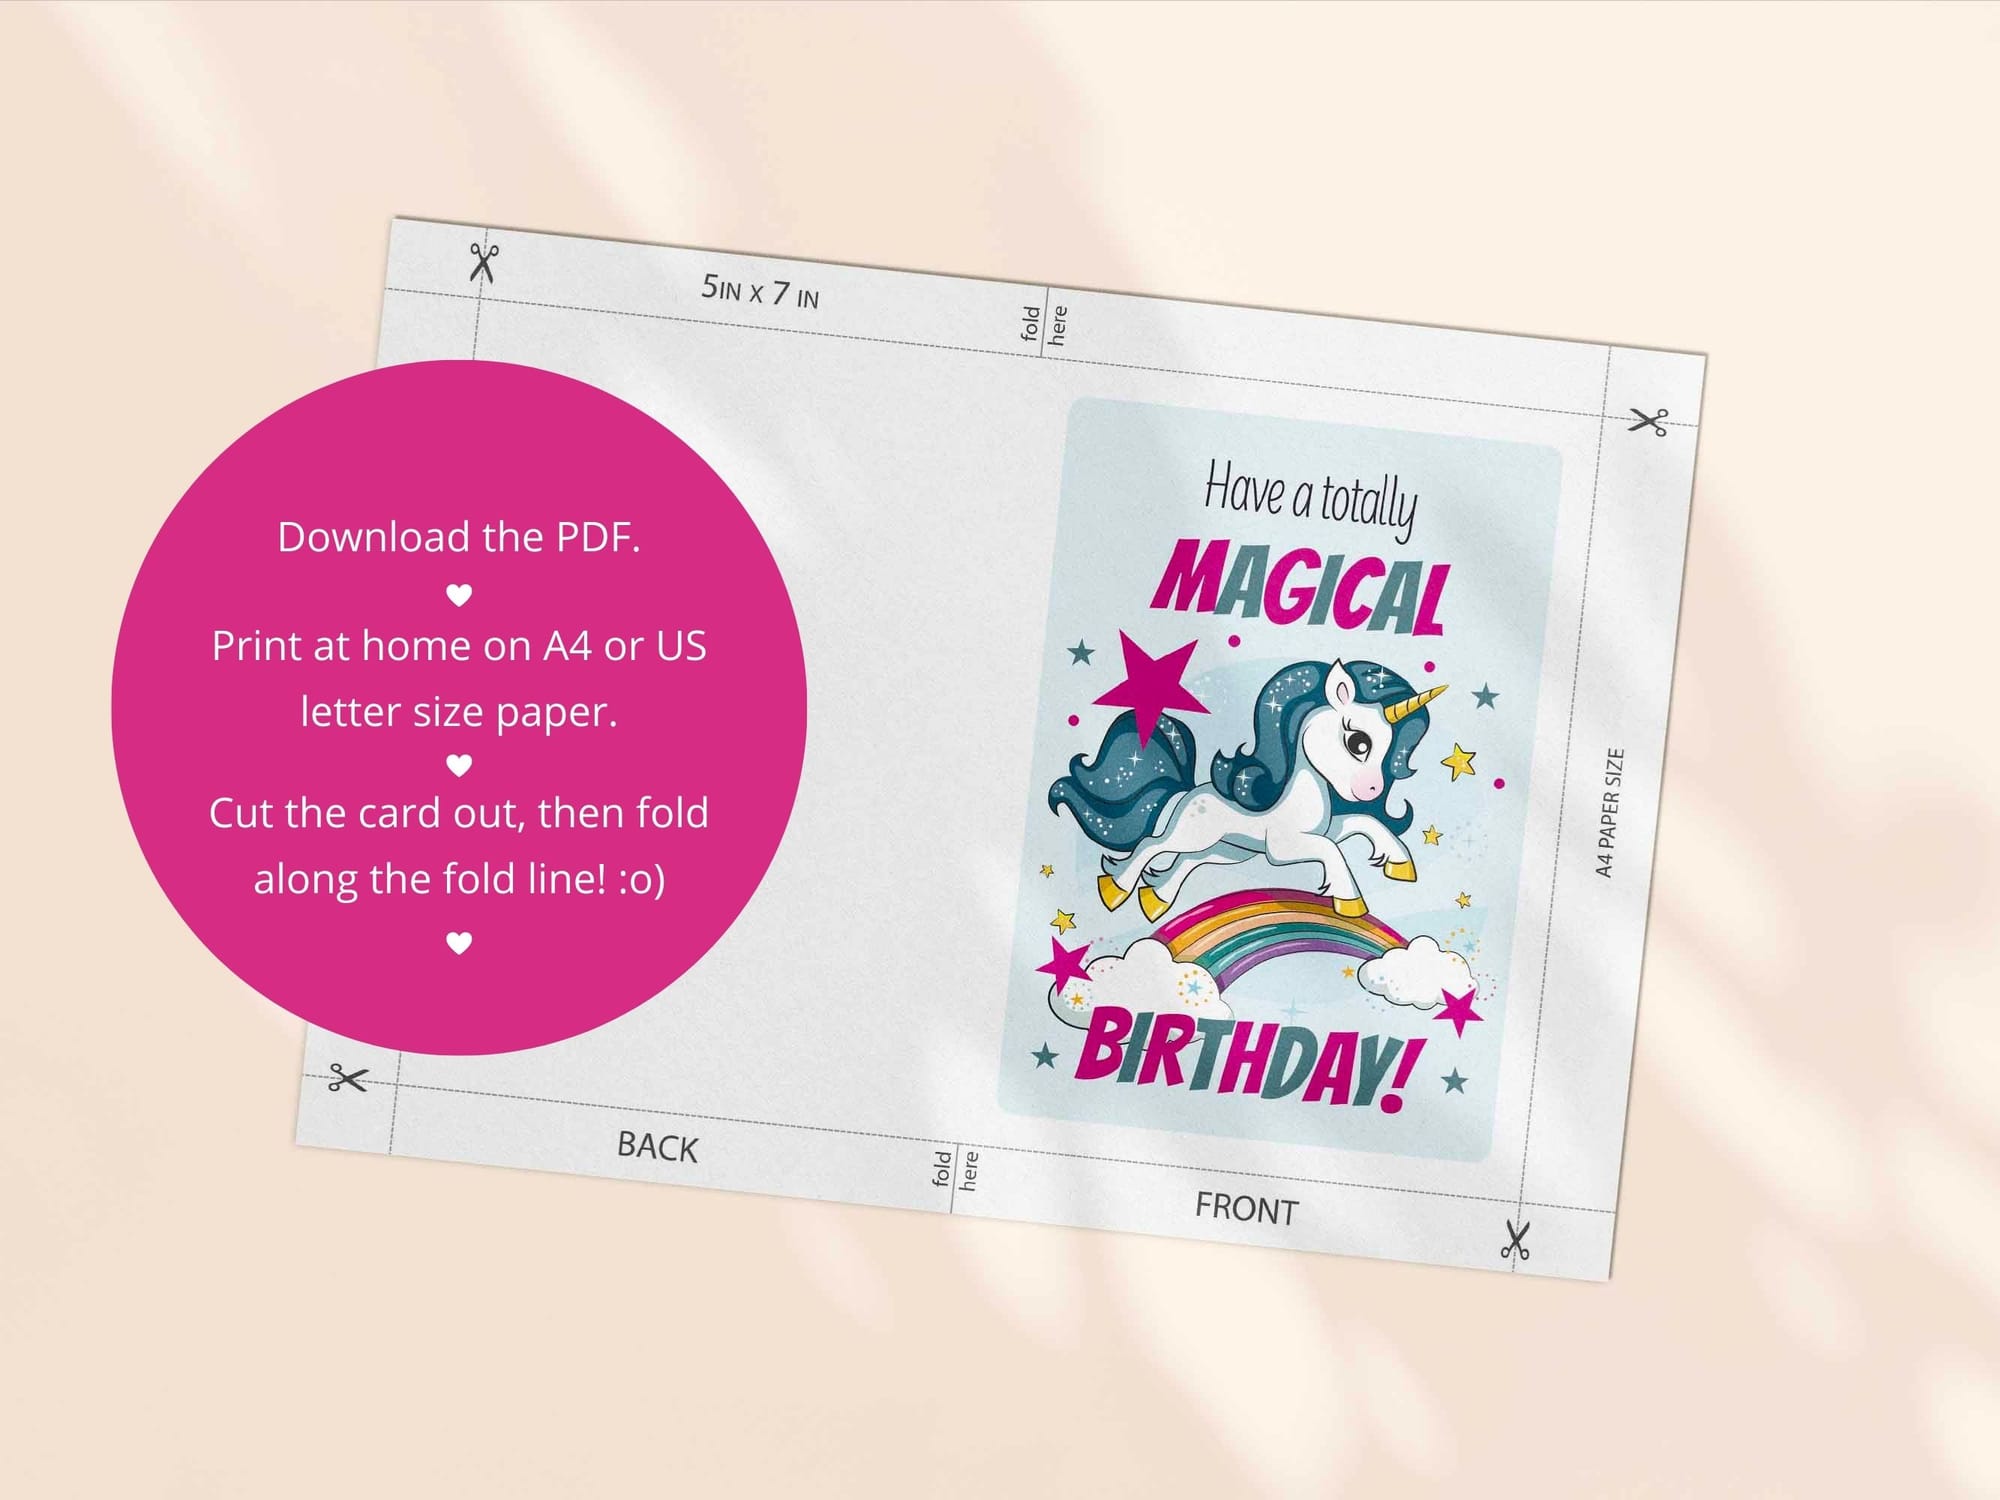 Printable kids birthday card template - both an A4 and US Letter print template are included in this download.